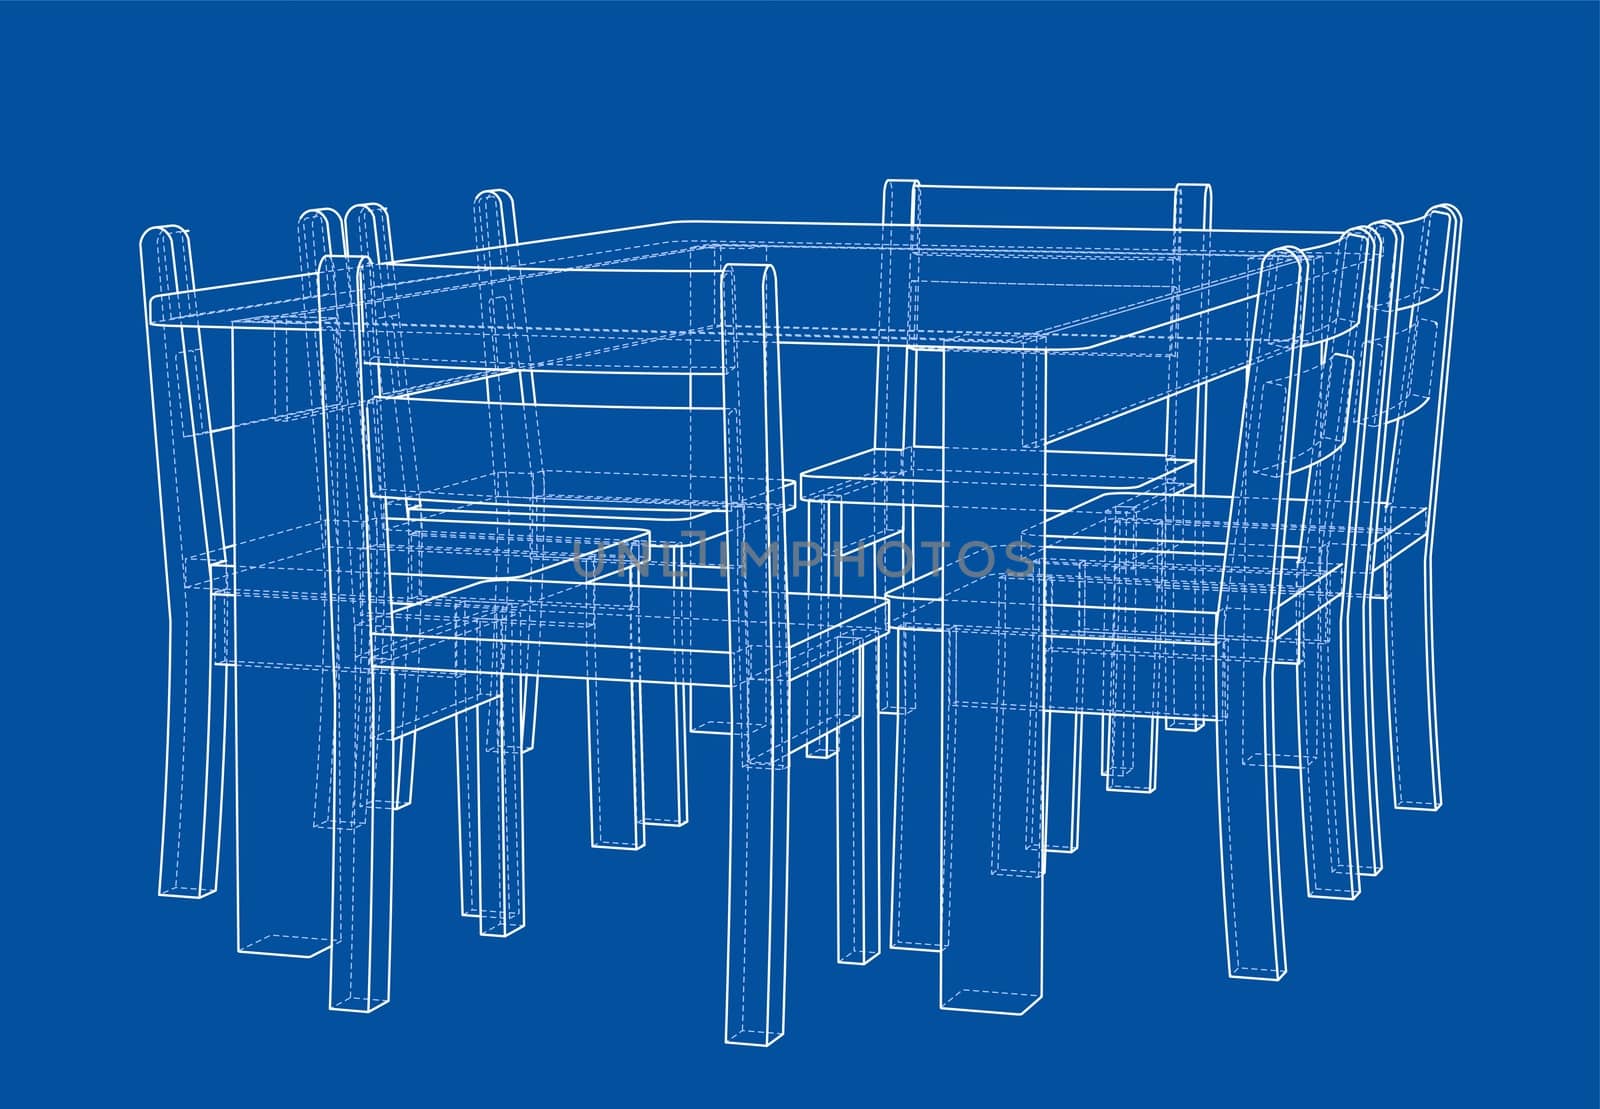 Table with chairs for 6 people. 3d illustration. Wire-frame style